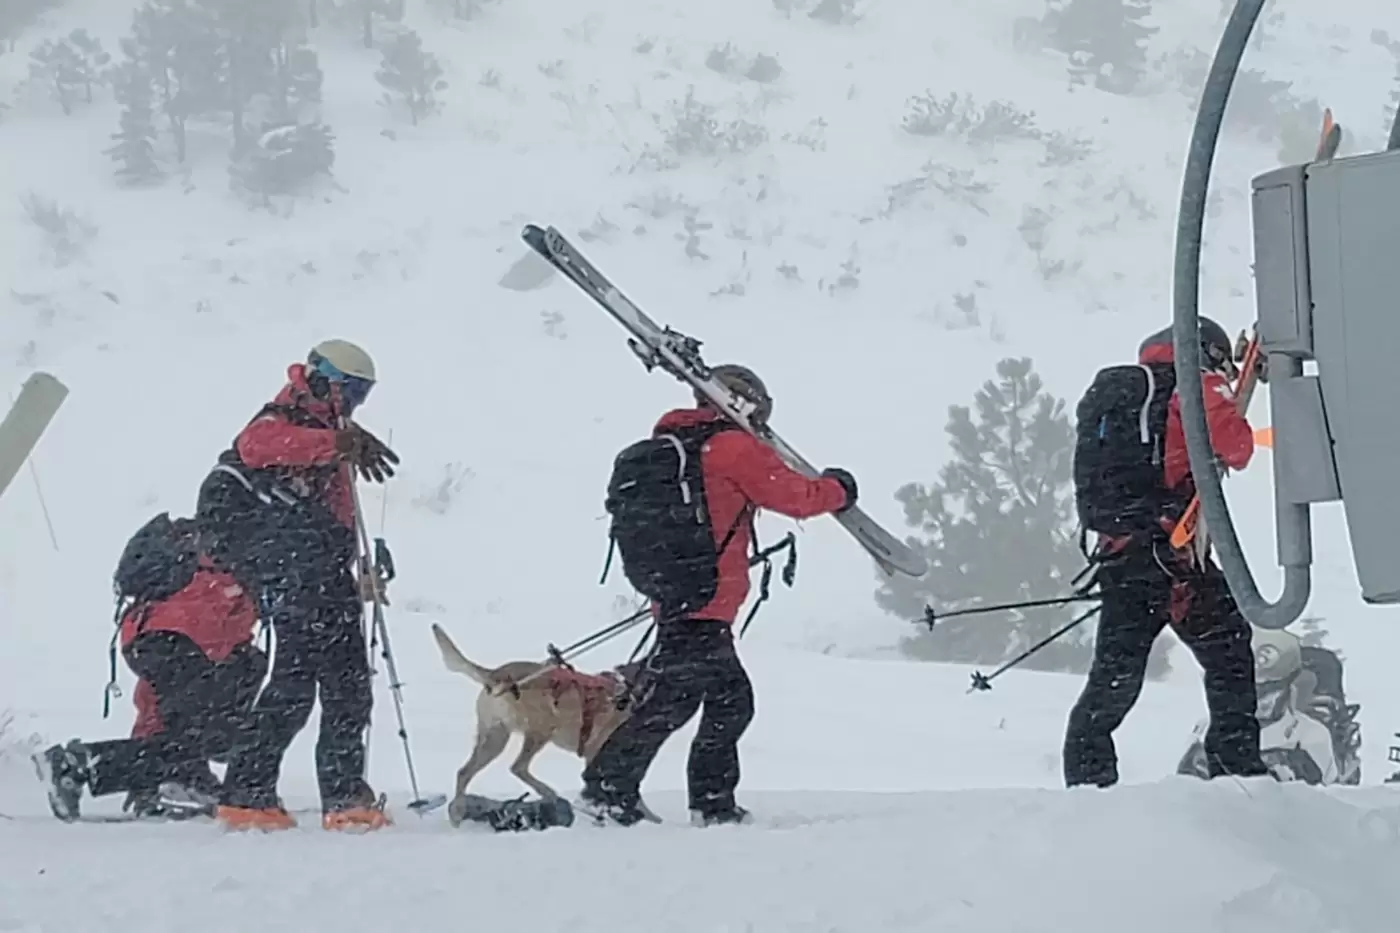 Palisades Tahoe avalanche shows that even resort skiing comes with nature’s wild risks